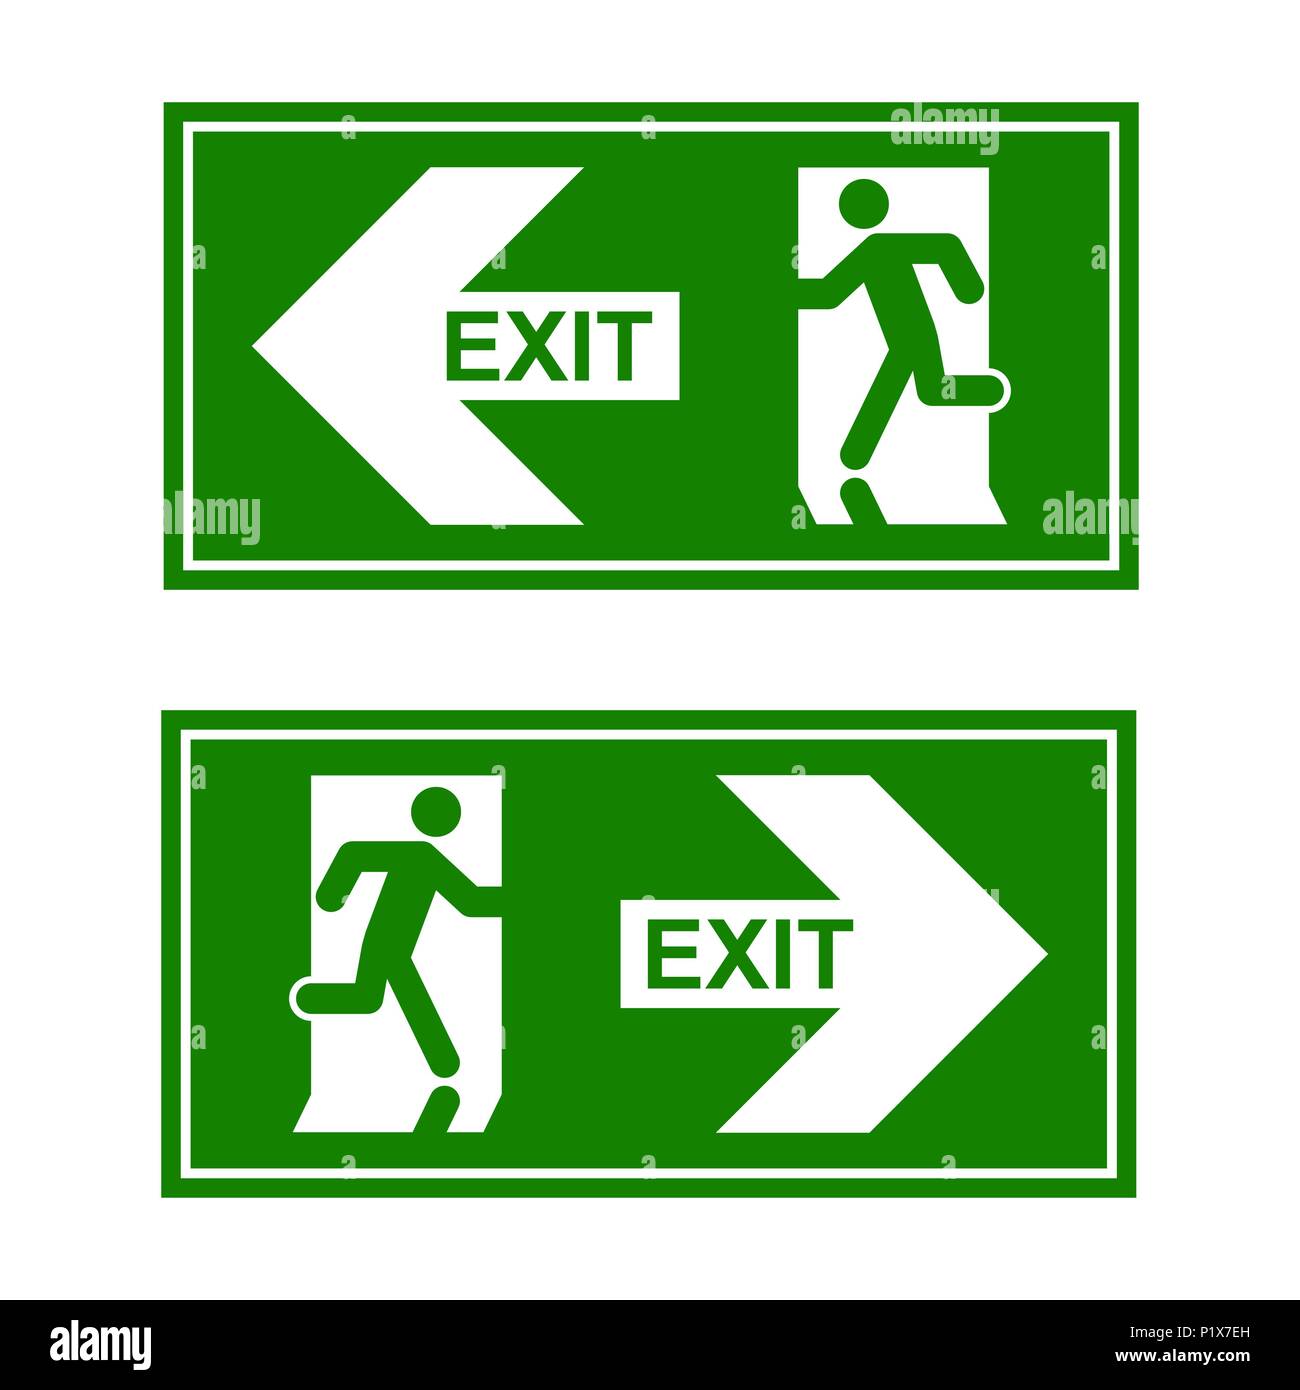 Emergency Exit Sign Meaning